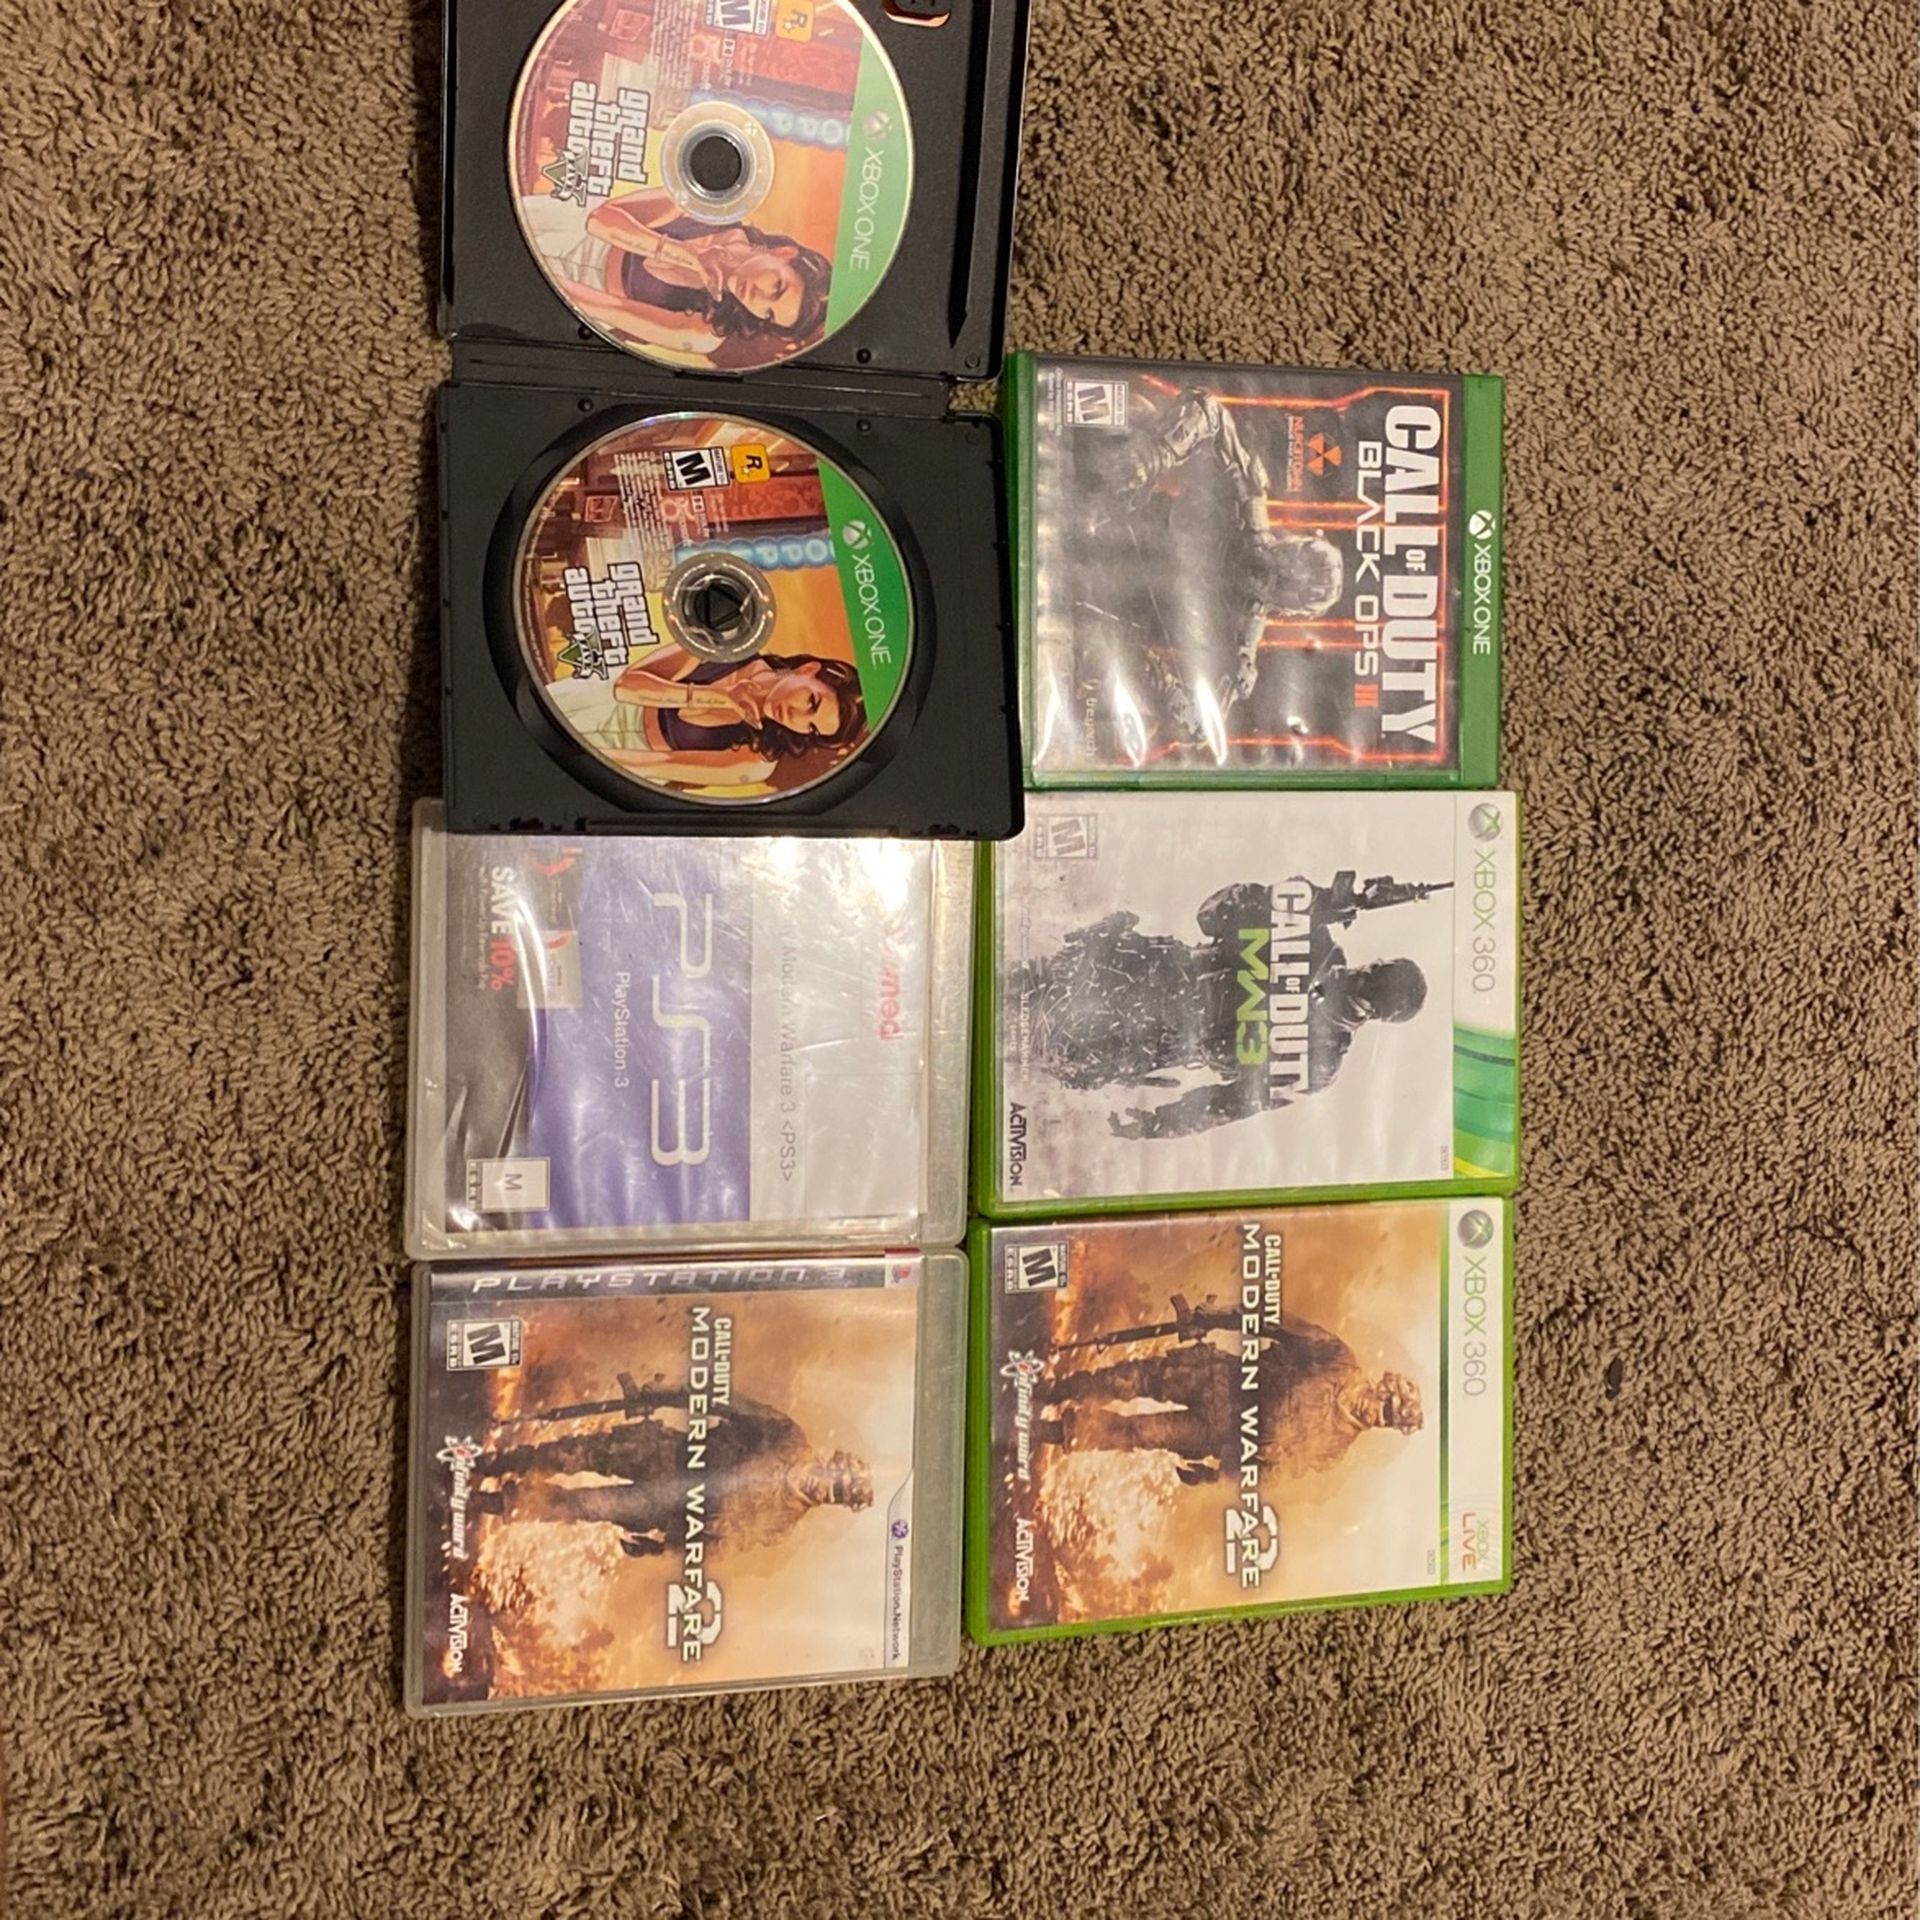 video games for Xbox360,Xbox one, and PS3